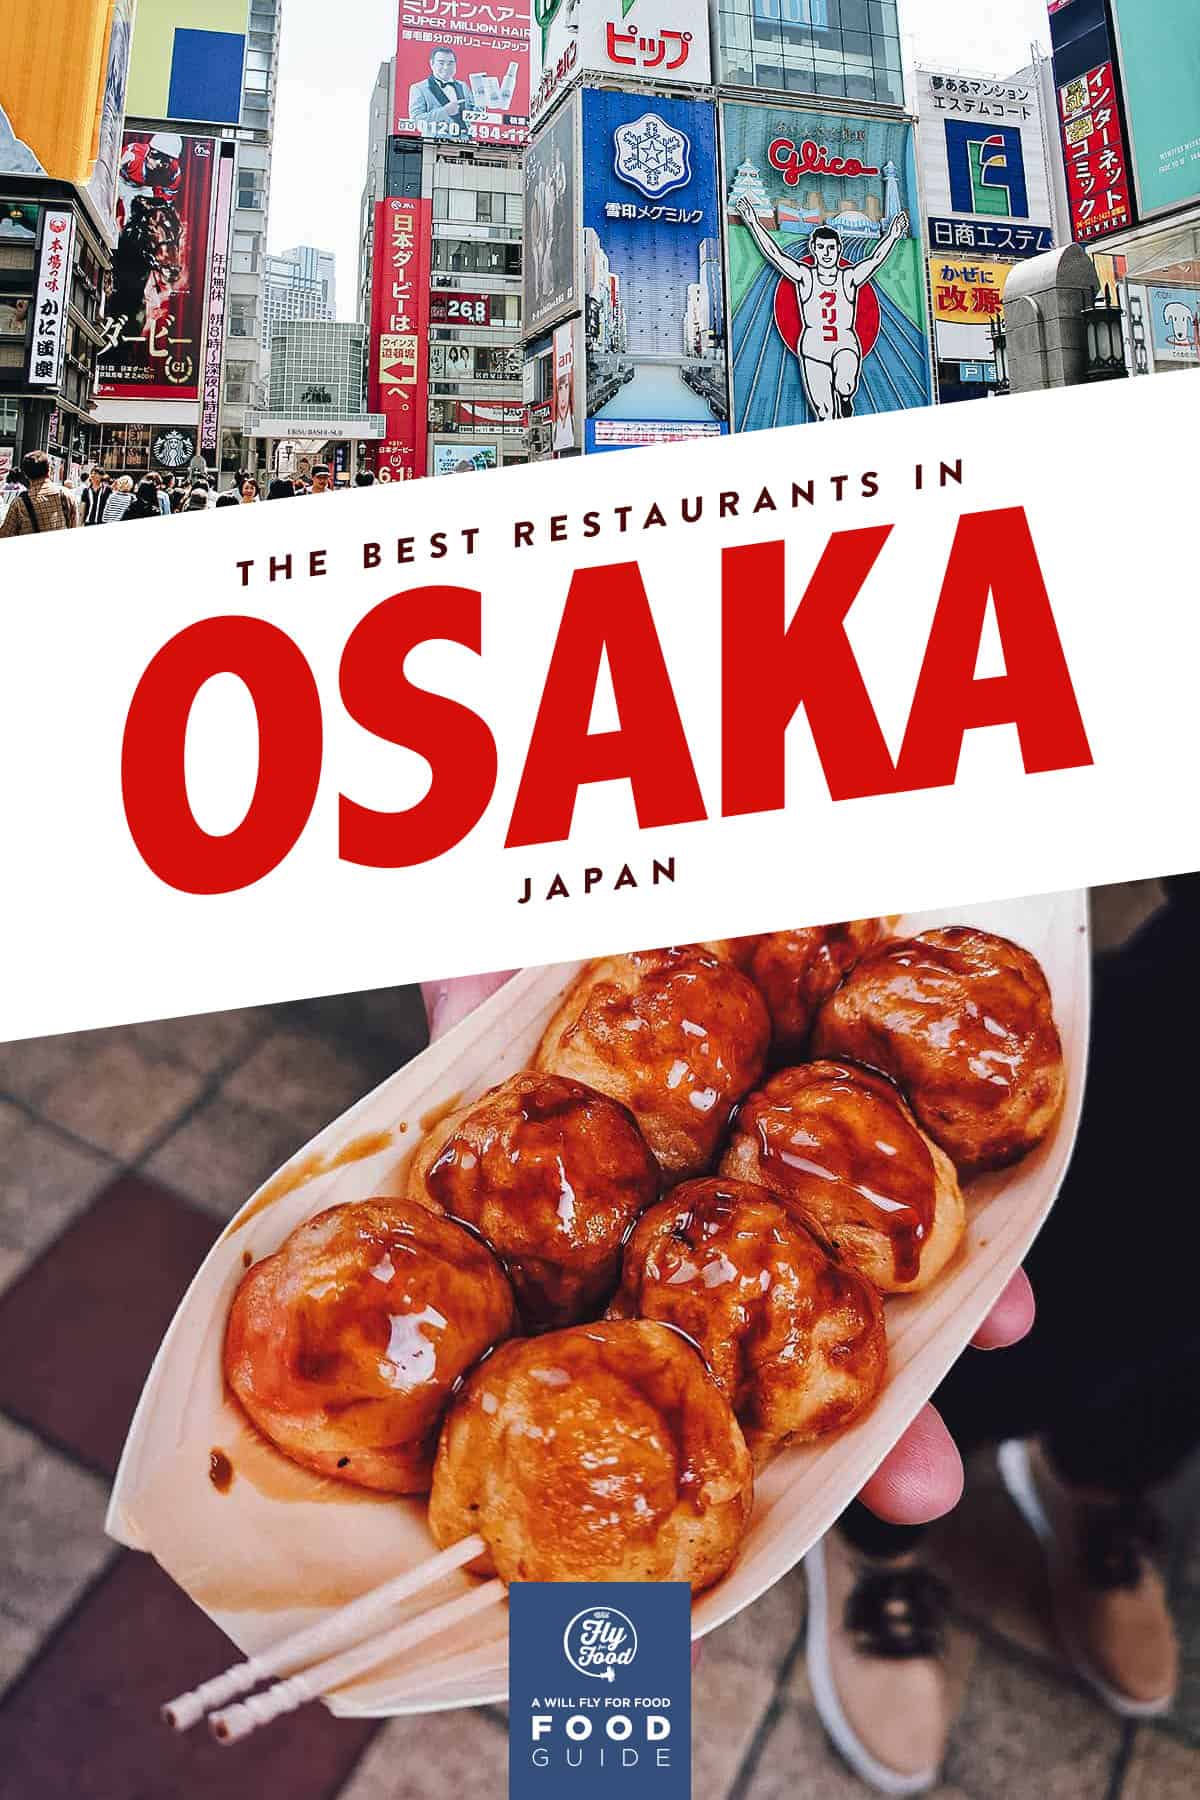 25 Osaka Restaurants You’ll Want to Fly For Will Fly for Food